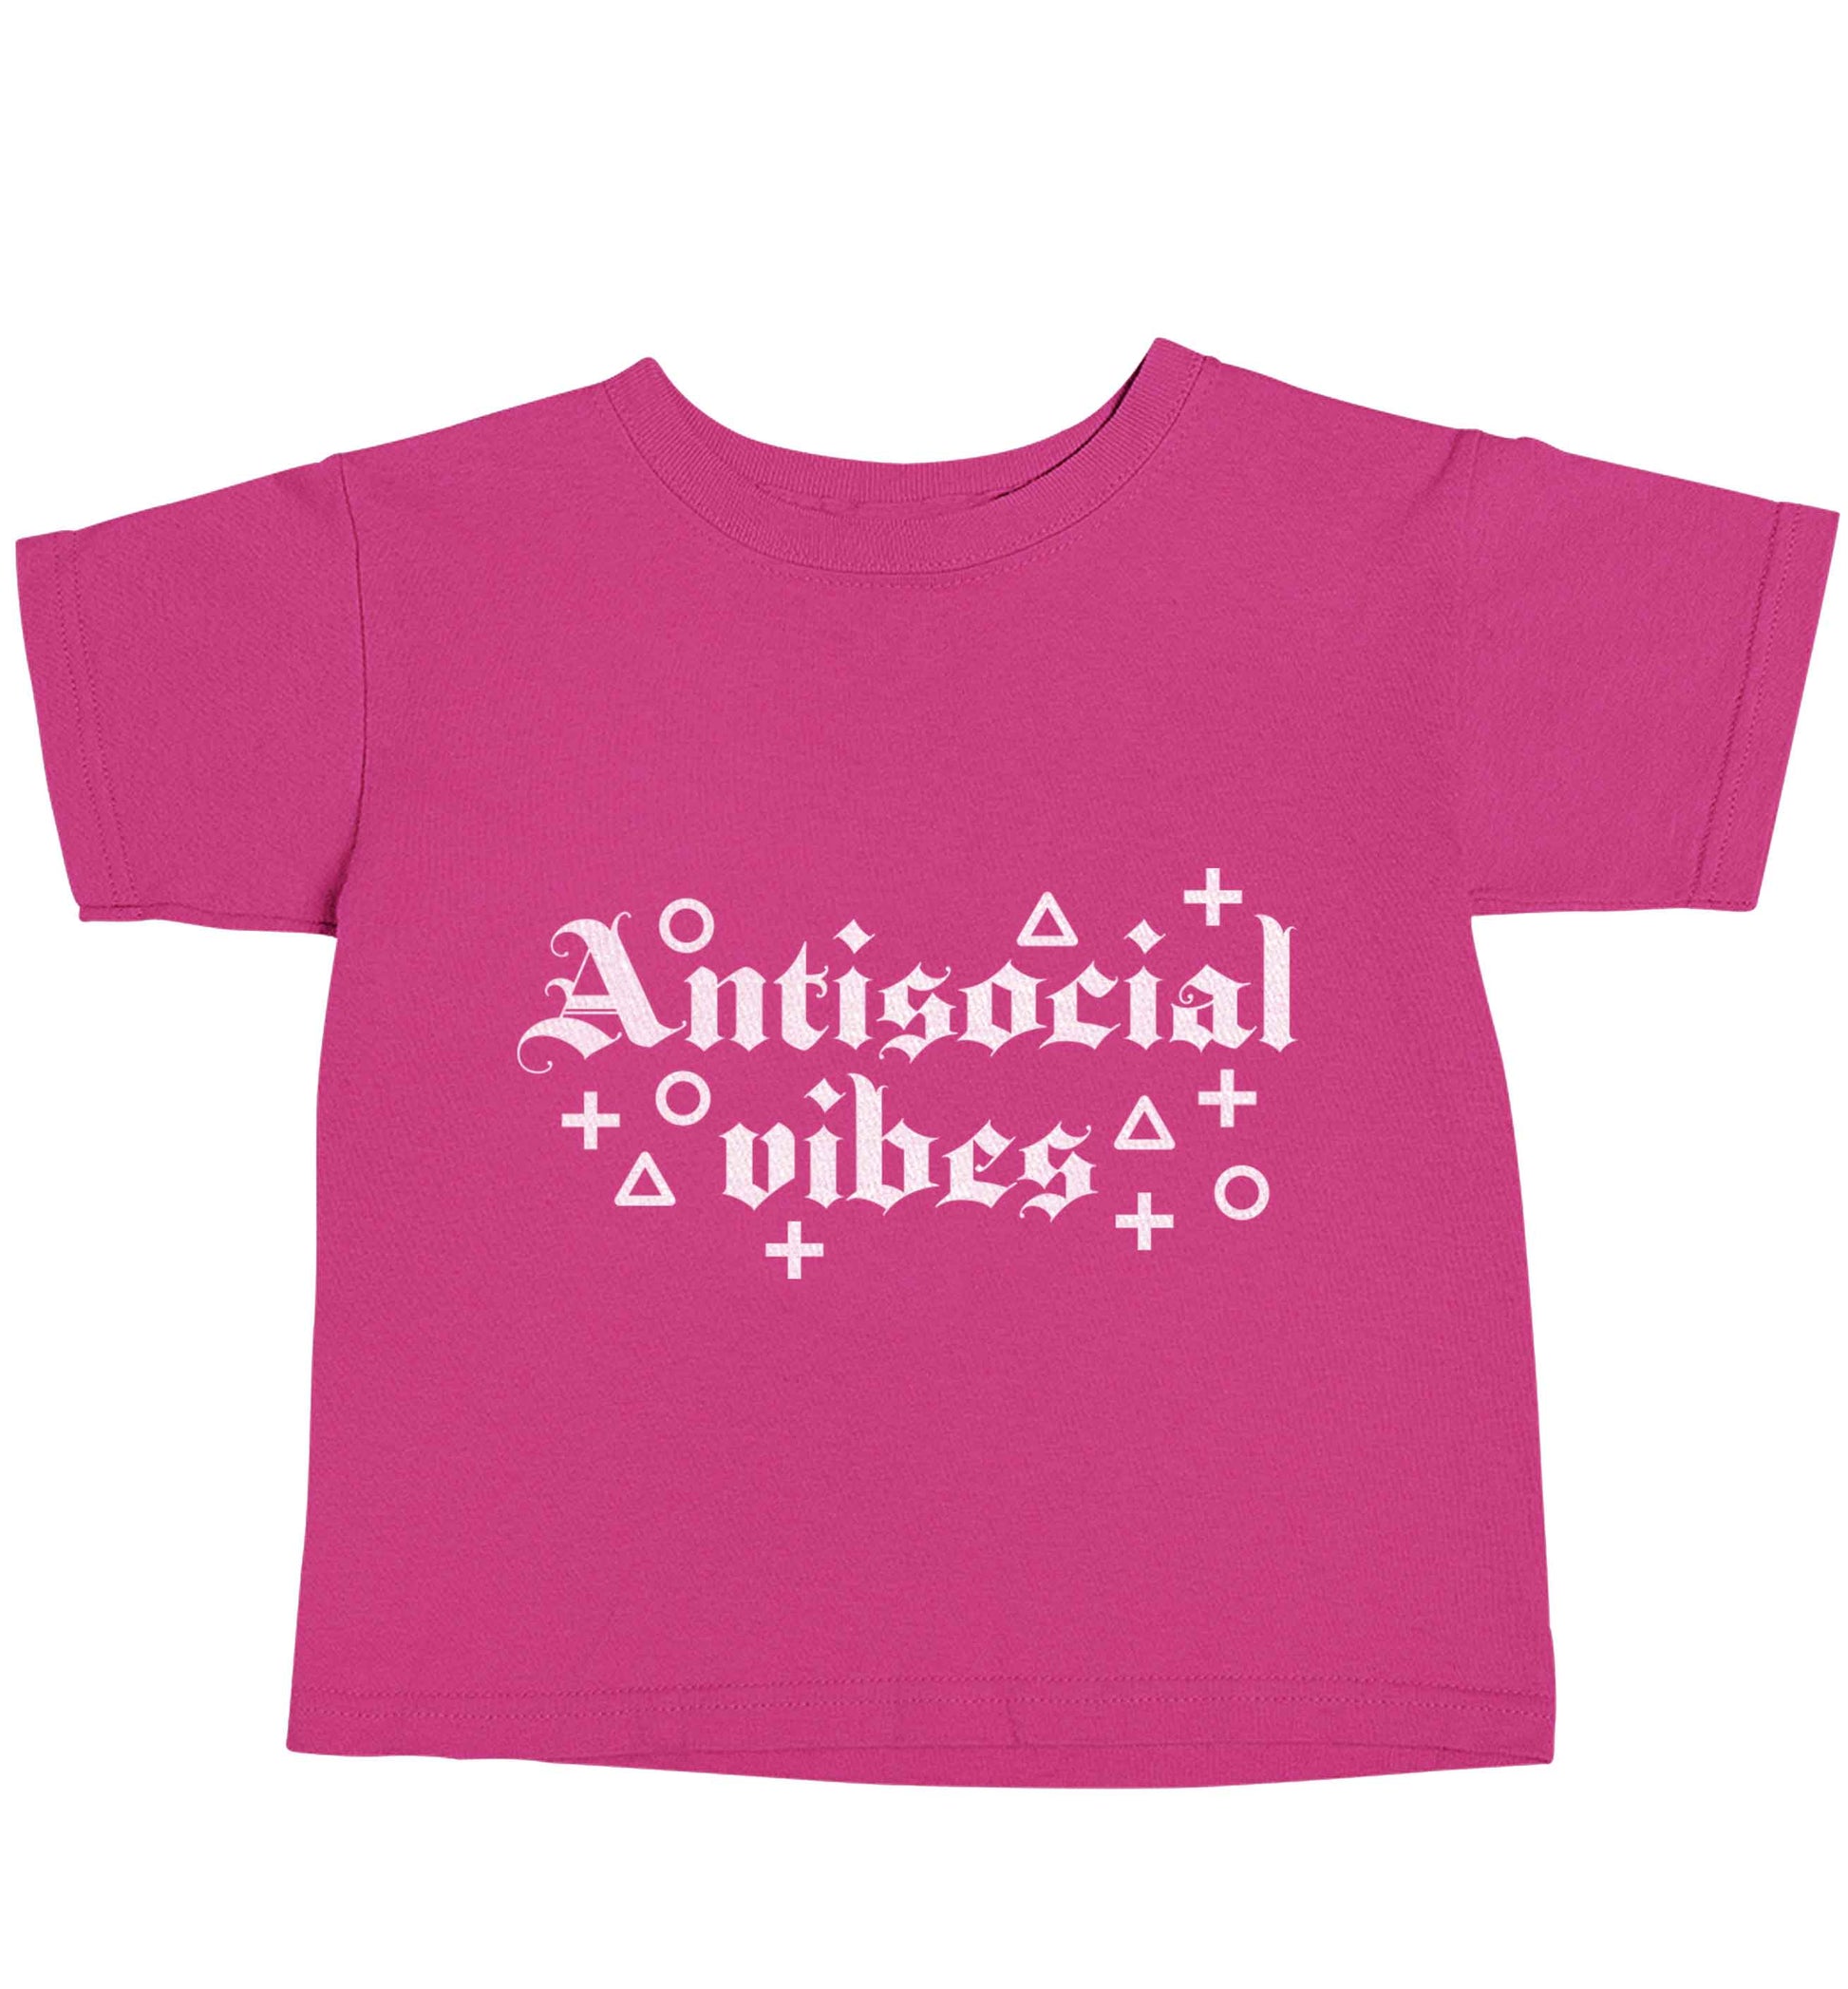 Antisocial vibes pink baby toddler Tshirt 2 Years